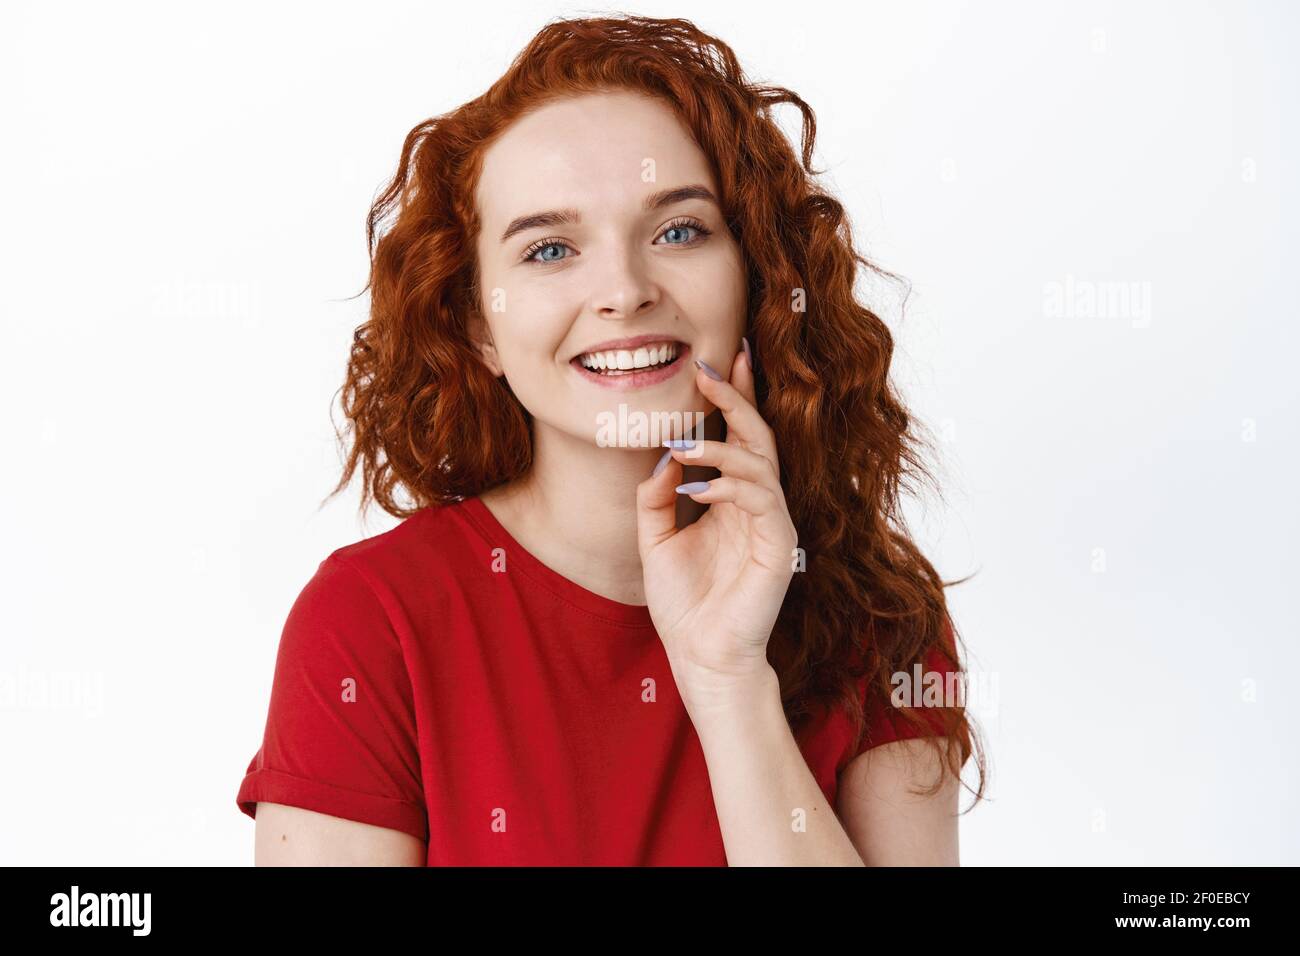 Close up portrait of smiling happy woman with ginger curly hair, touching pale smooth and healthy skin with fingertips, looking cheerful and laughing Stock Photo